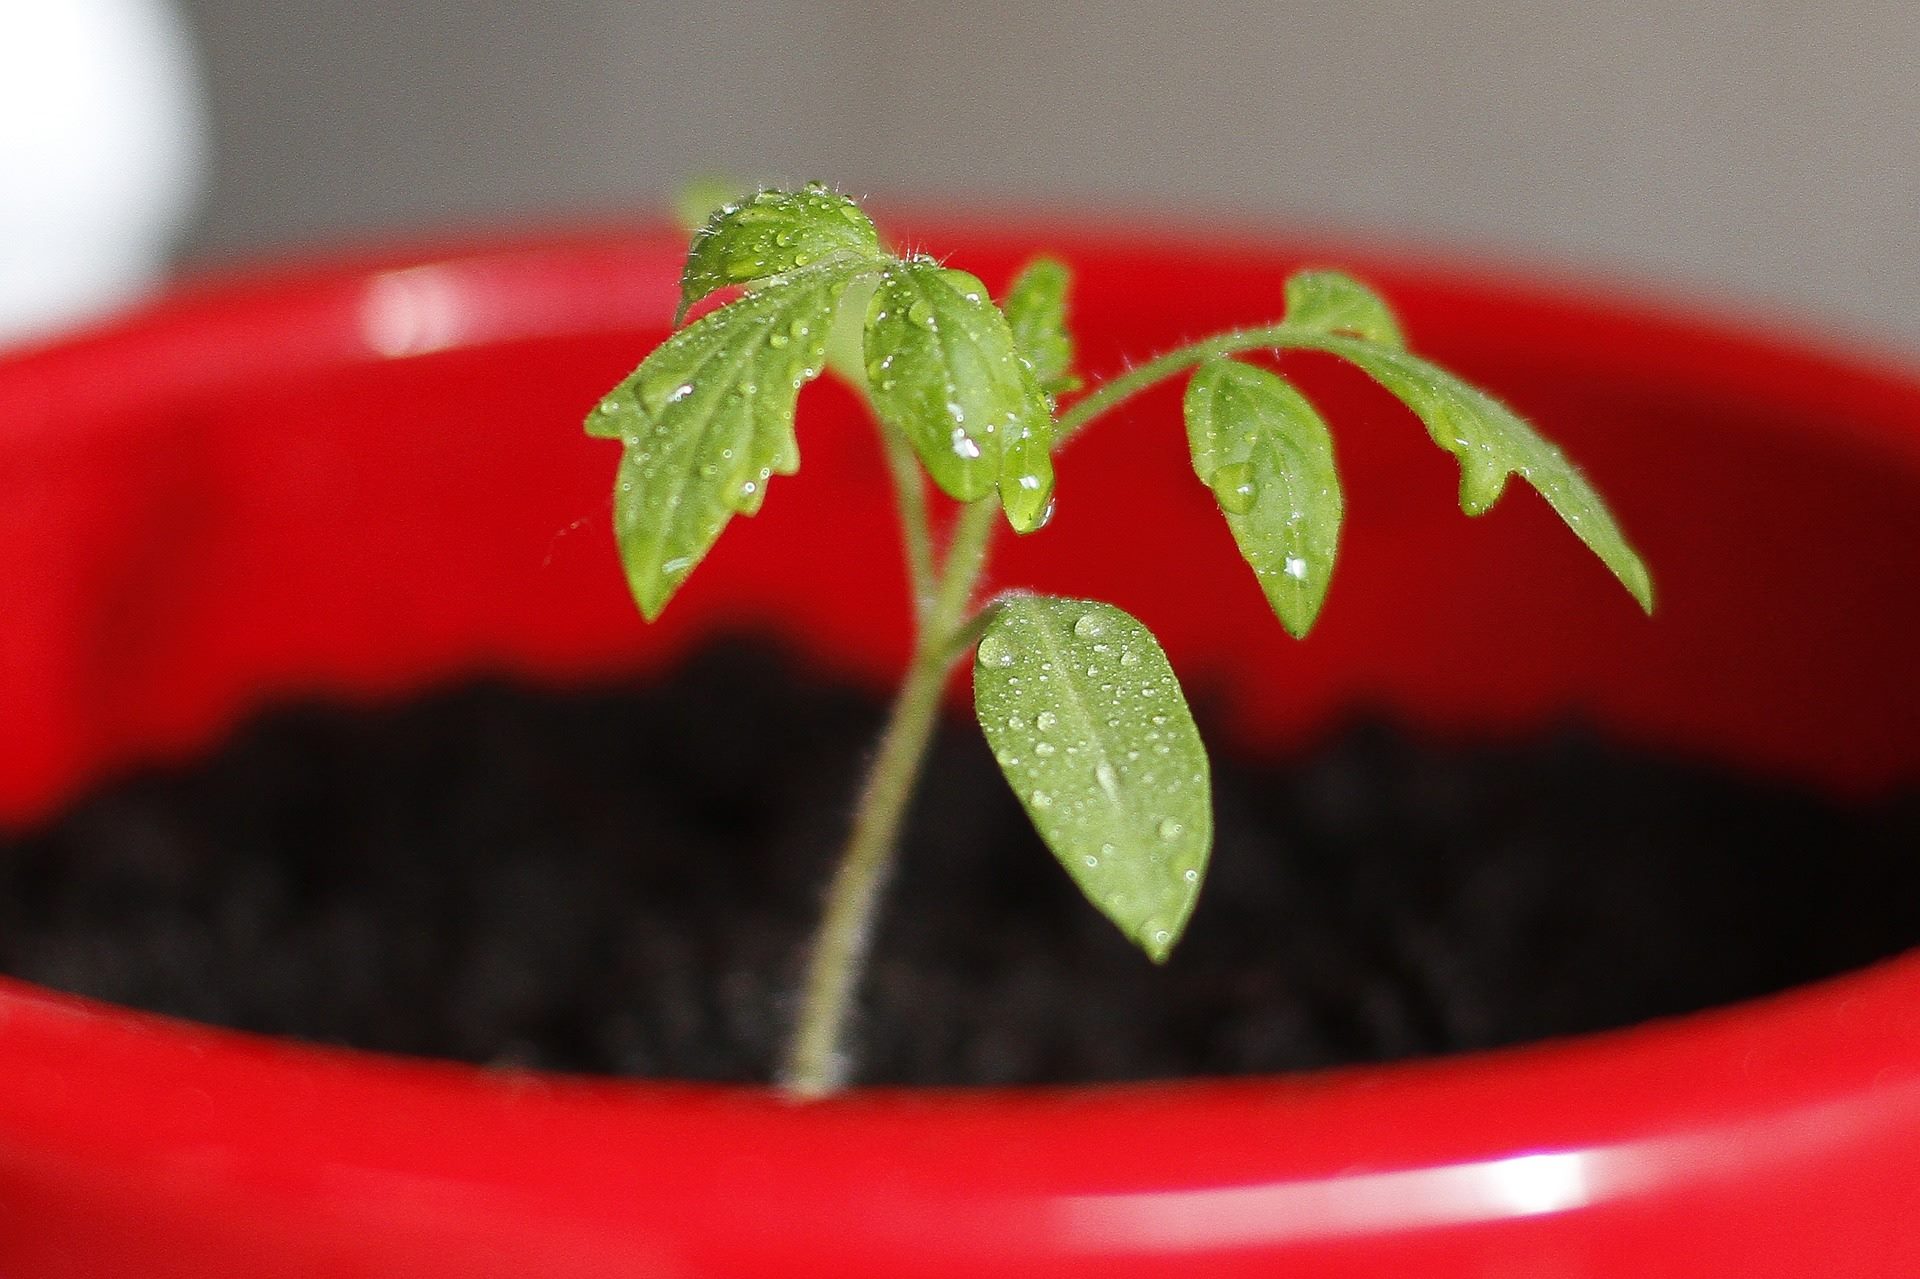 How To Plant Tomato Seeds Indoors